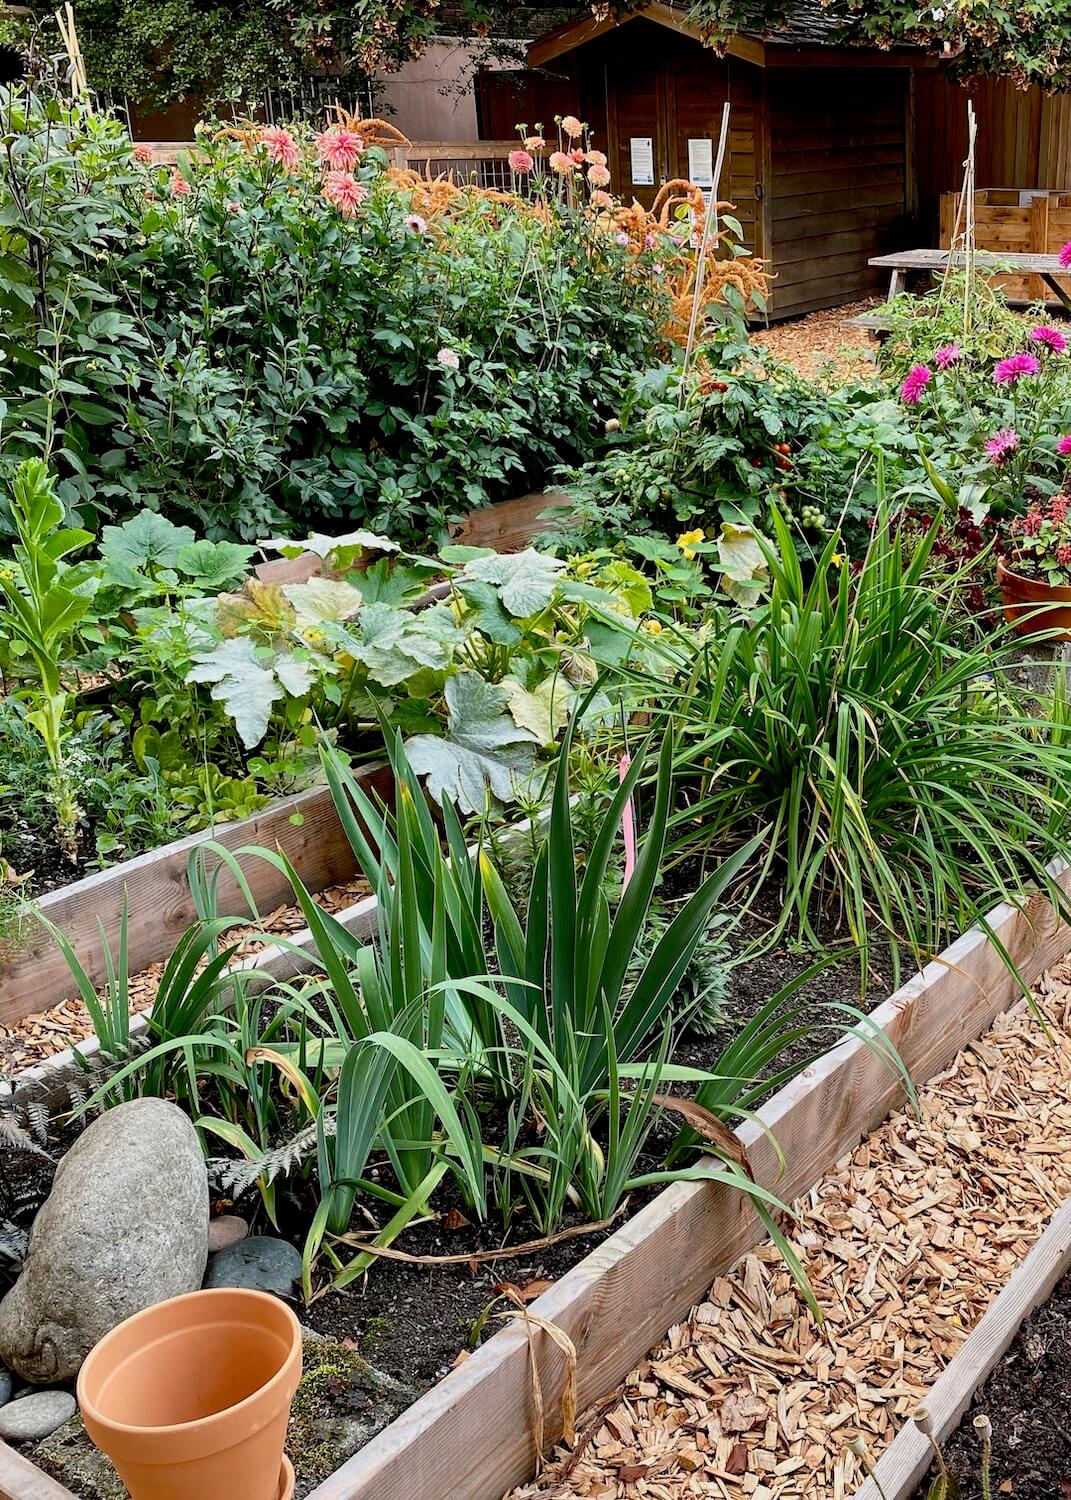 A view of the P-Patch garden showing an empty flower pot and variety of plants in a series of four planter boxes that are separated by wood chips on the ground. In the background is a picnic table and garden shed.